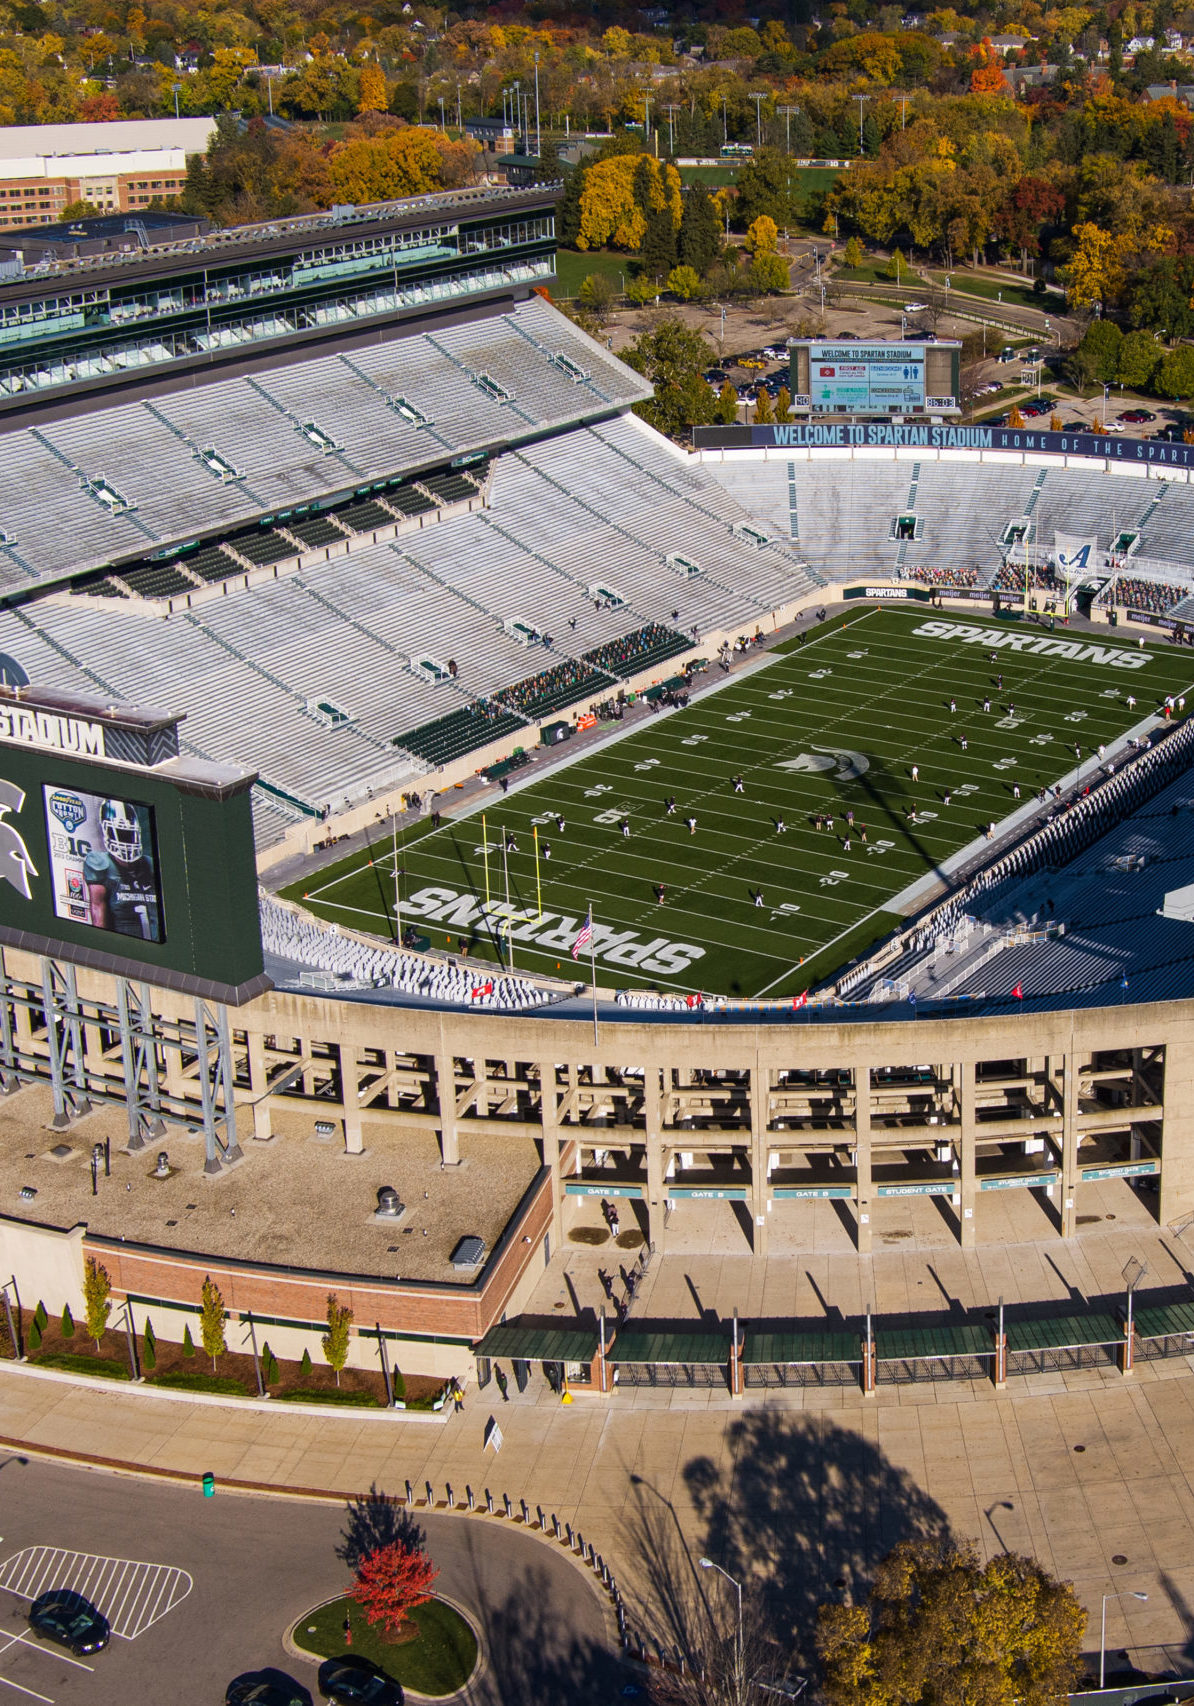 EAST LANSING, MICHIGAN - OCTOBER 24:  In this drone image, Spartan Stadium is seen in this aerial view prior to the game between the Michigan State Spartans and the Rutgers Scarlet Knights  at Spartan Stadium on October 24, 2020 in East Lansing, Michigan. (Photo by Quinn Harris/Getty Images)